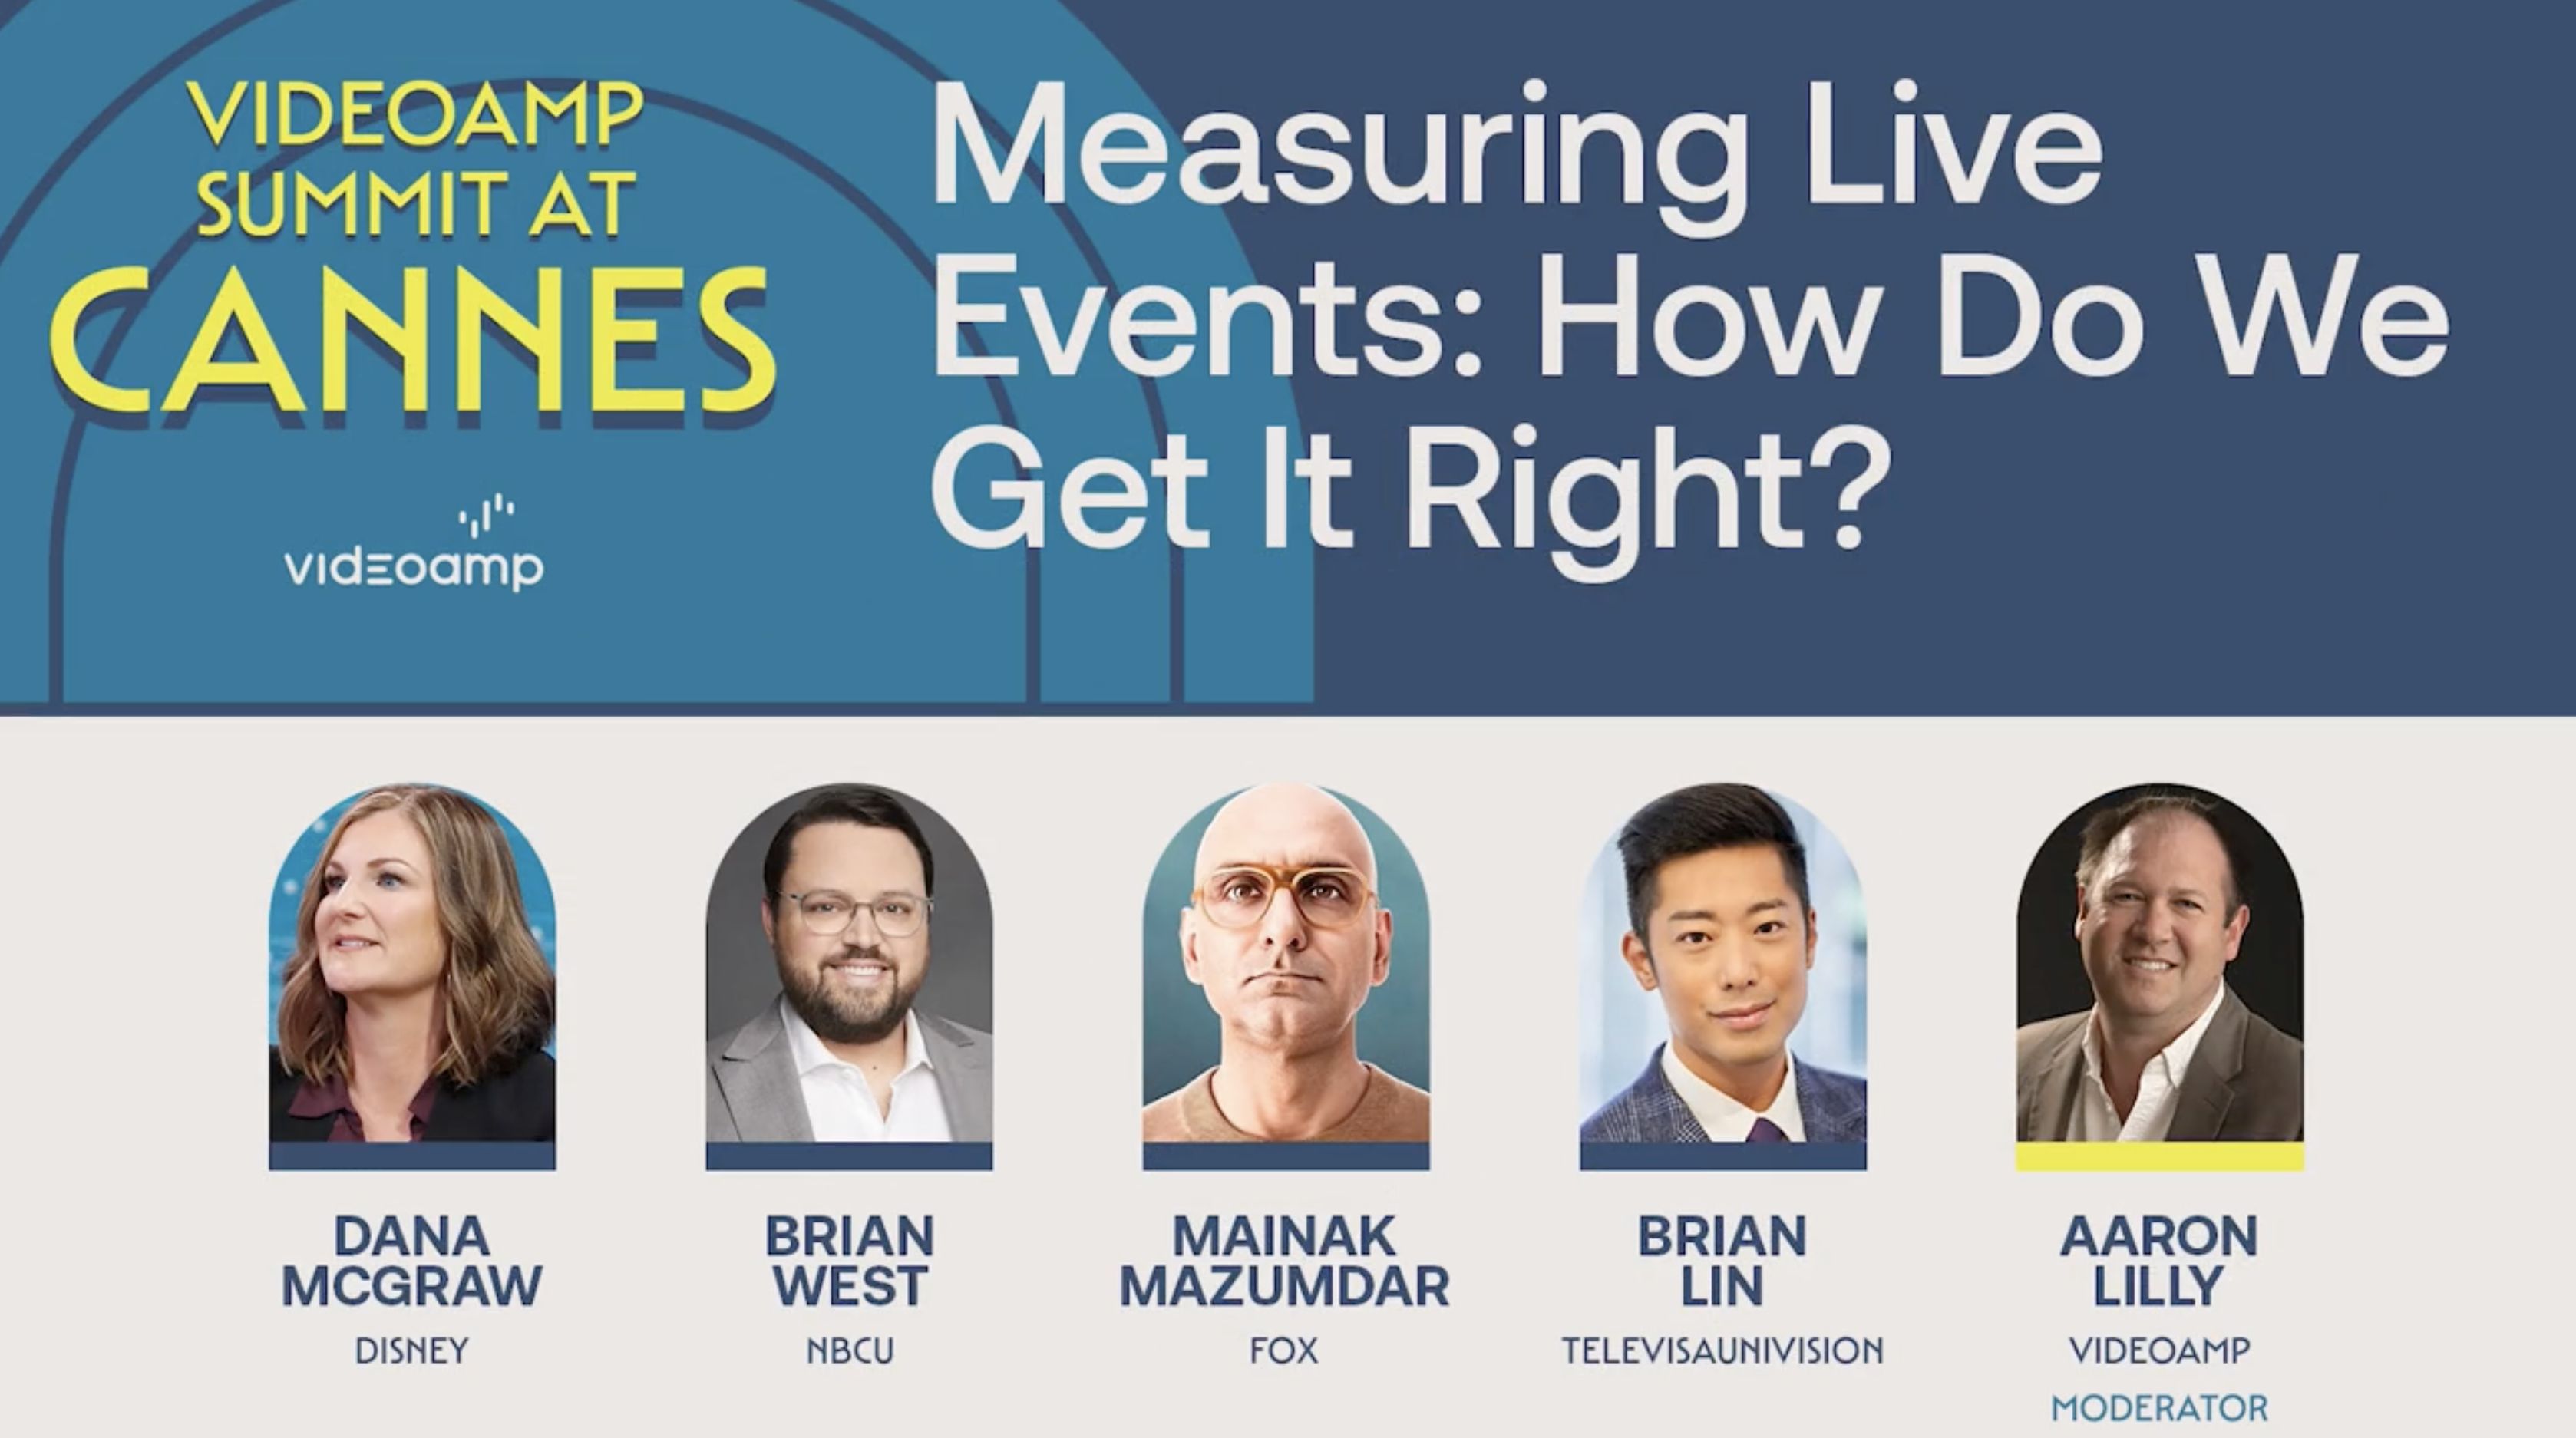 Measuring Live Events: How Do We Get It Right?